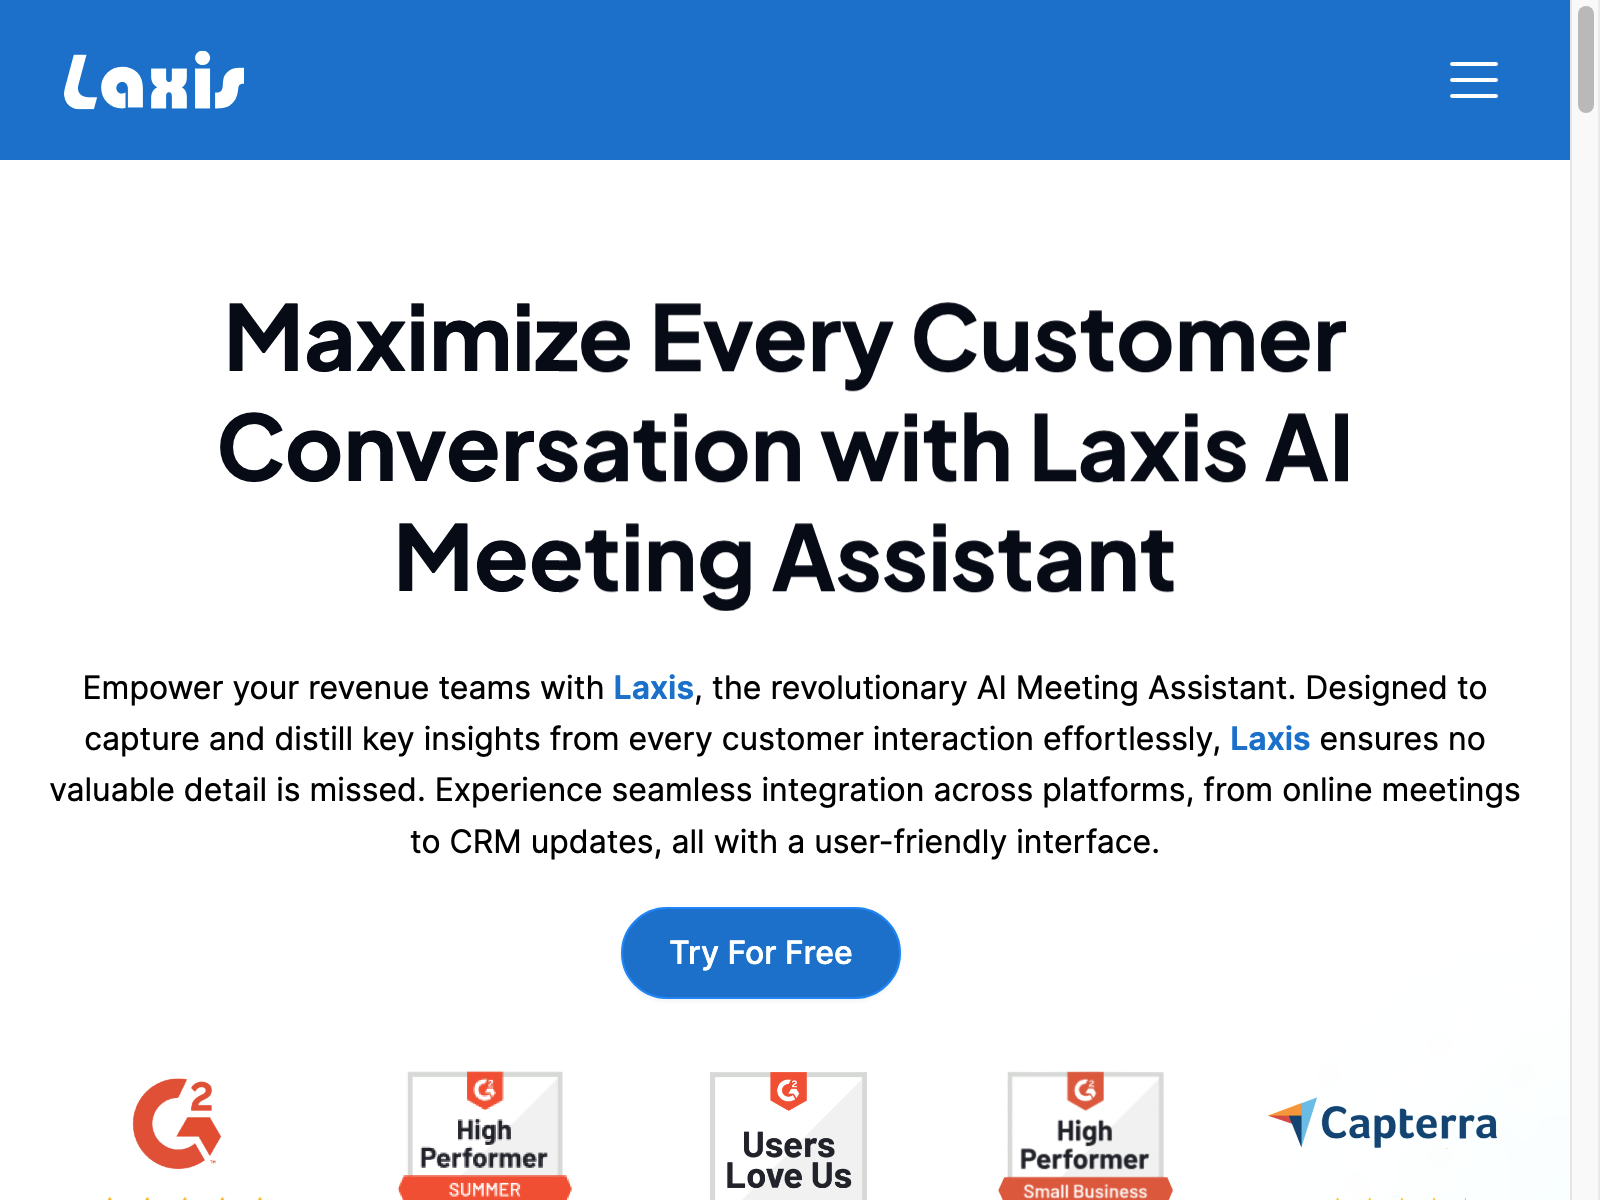 laxis Review: Pros, Cons, Alternatives